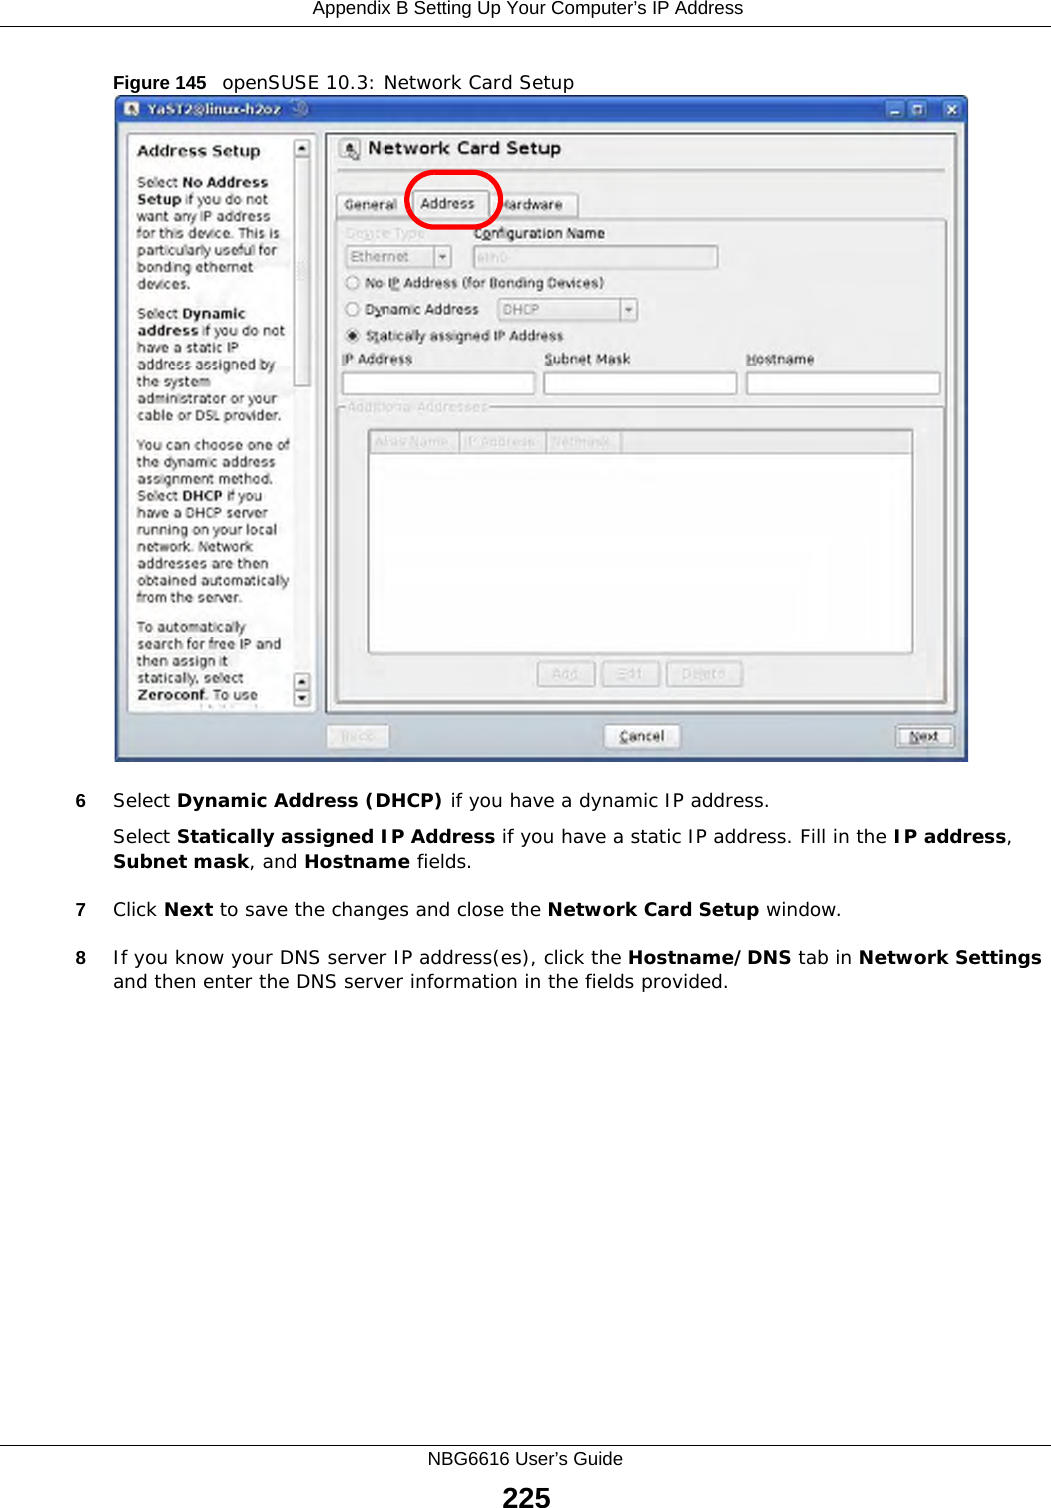  Appendix B Setting Up Your Computer’s IP AddressNBG6616 User’s Guide225Figure 145   openSUSE 10.3: Network Card Setup6Select Dynamic Address (DHCP) if you have a dynamic IP address.Select Statically assigned IP Address if you have a static IP address. Fill in the IP address, Subnet mask, and Hostname fields.7Click Next to save the changes and close the Network Card Setup window. 8If you know your DNS server IP address(es), click the Hostname/DNS tab in Network Settings and then enter the DNS server information in the fields provided.